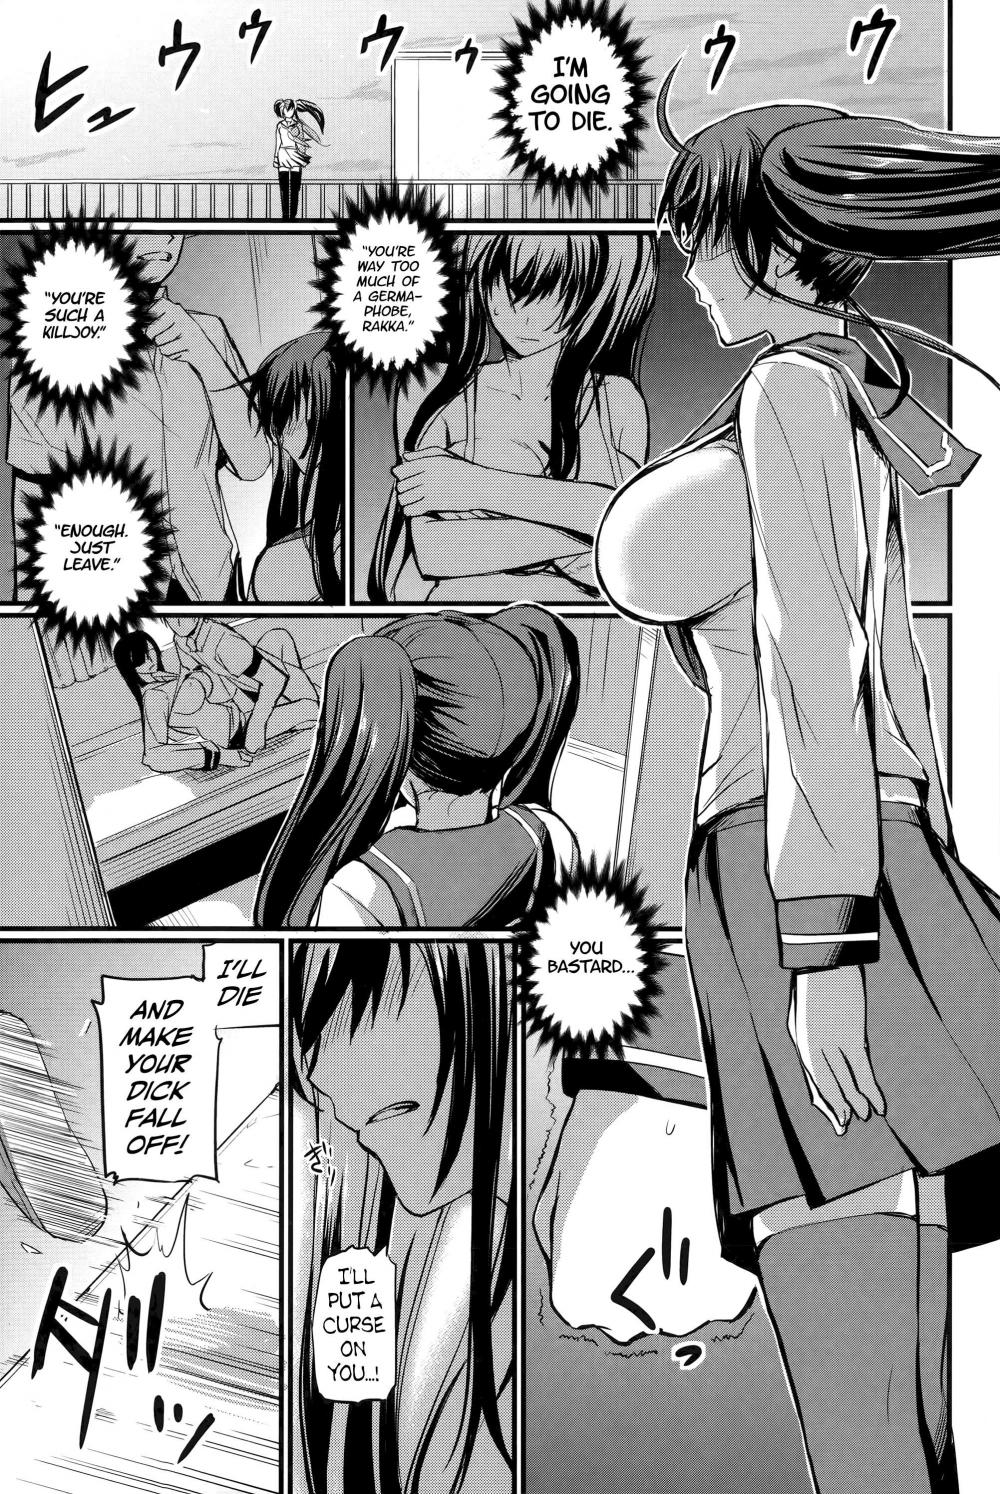 Hentai Manga Comic-How To Stop A Suicide-Read-1